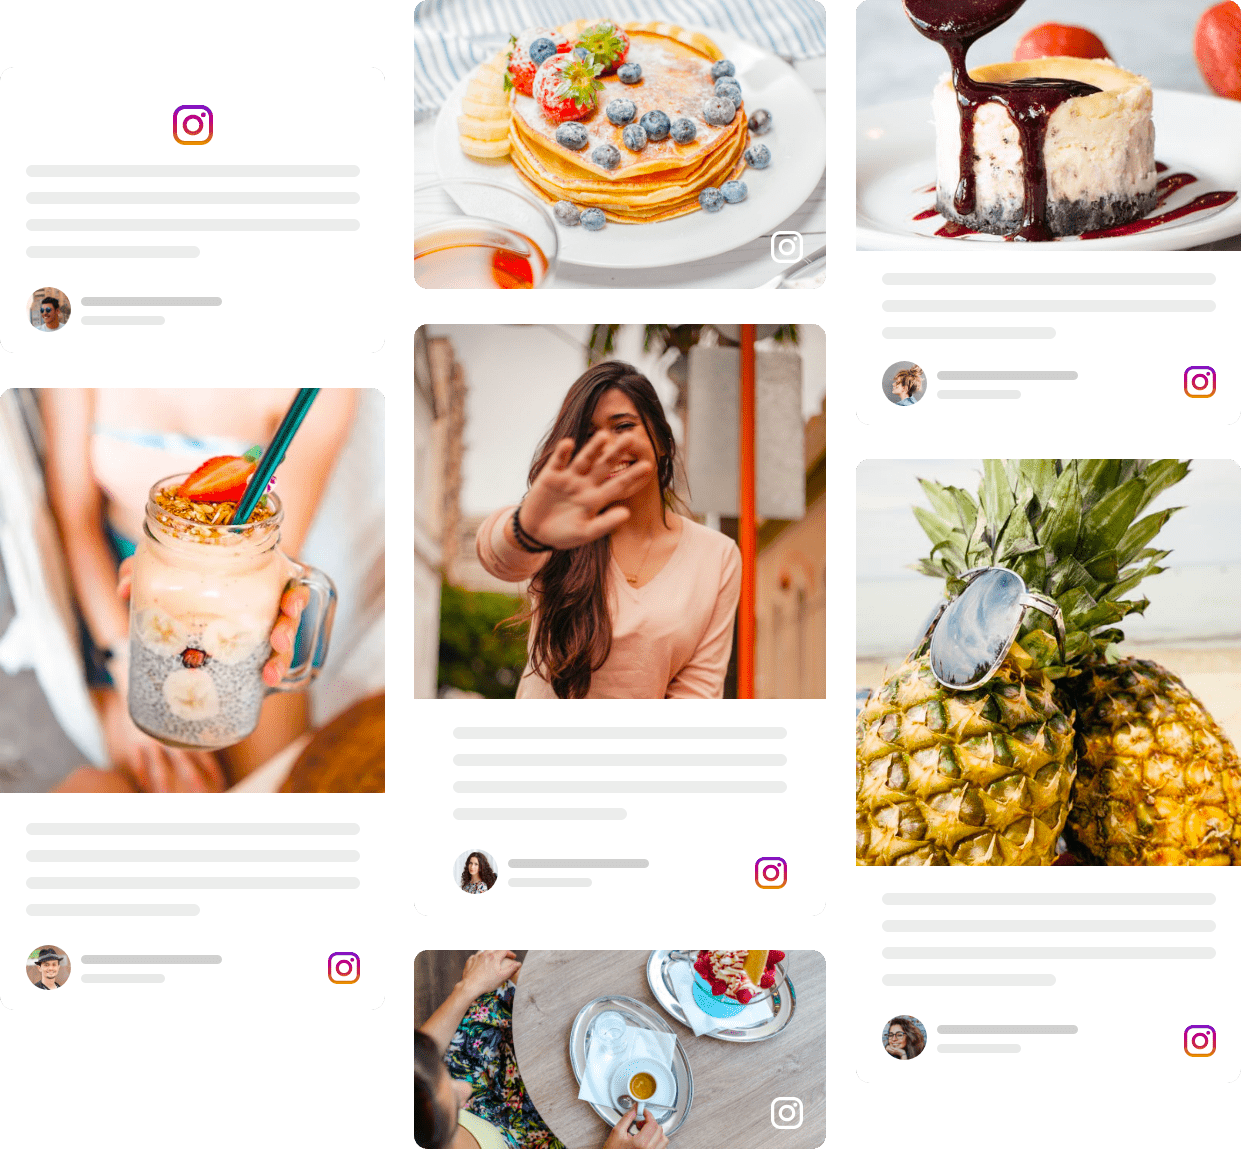 Best Instagram Wall For Events And Website